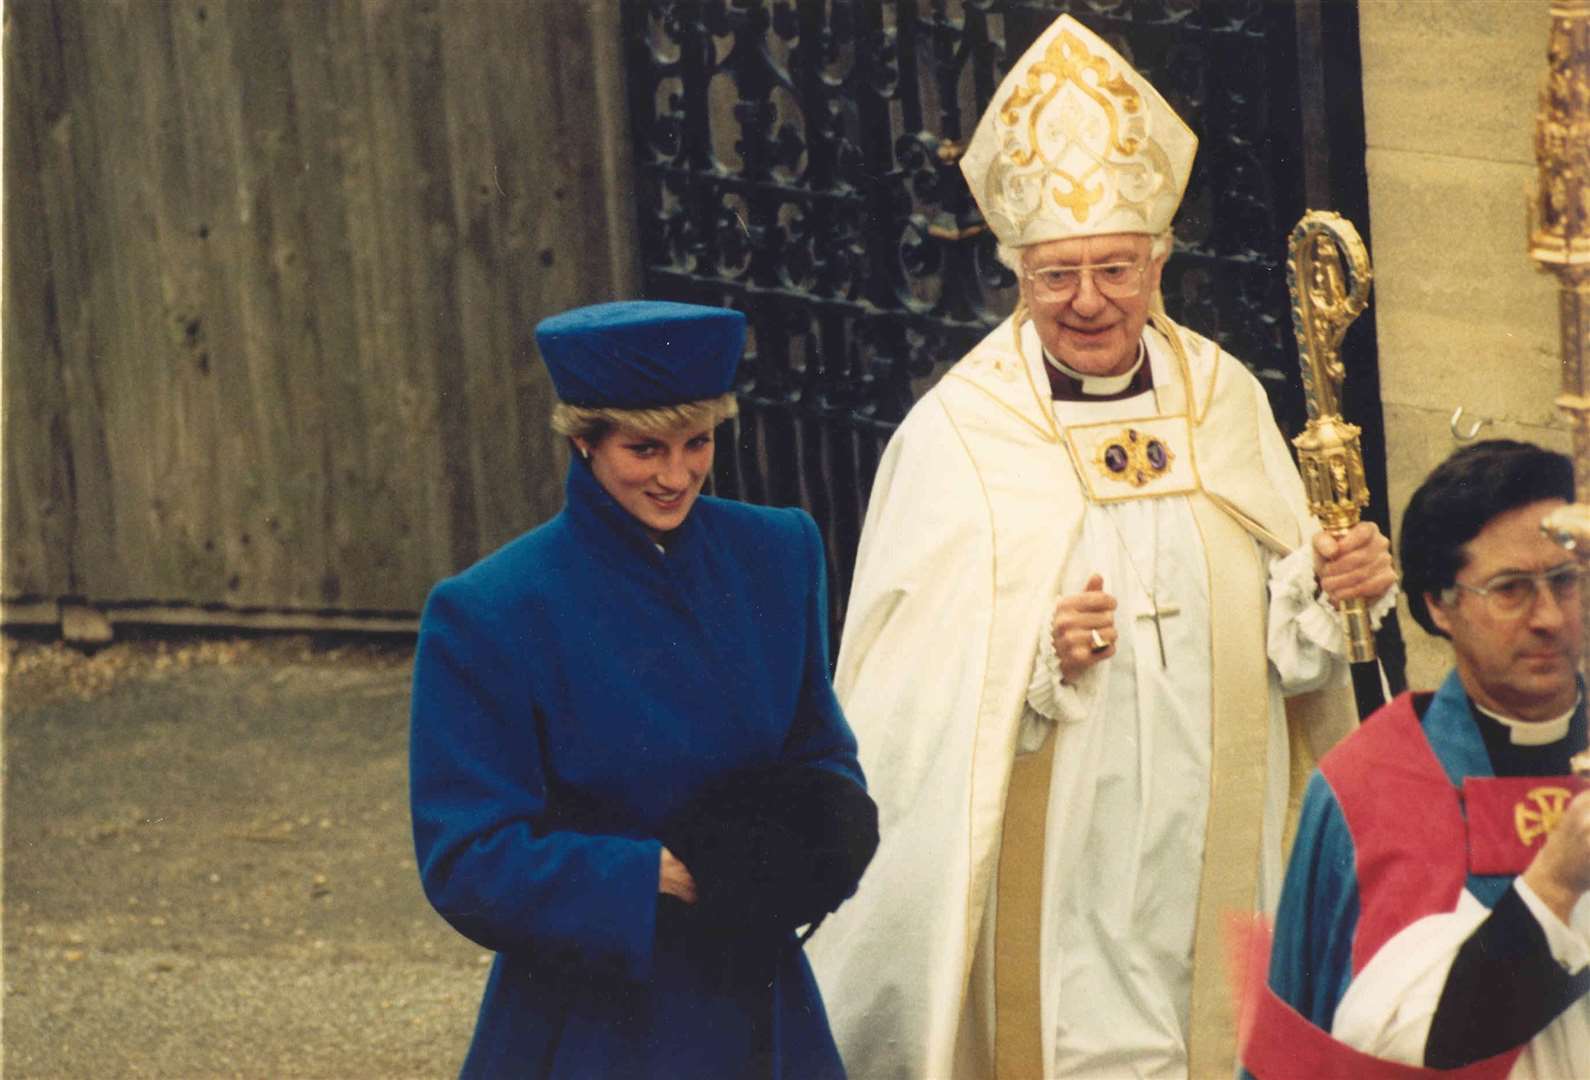 An advent carol service at Canterbury Cathedral for more than 1,000 children turned into a royal celebration when Princess Diana decided to attend in December 1986. Here she is seen leaving the cathedral with the Archbishop, Dr Robert Runcie